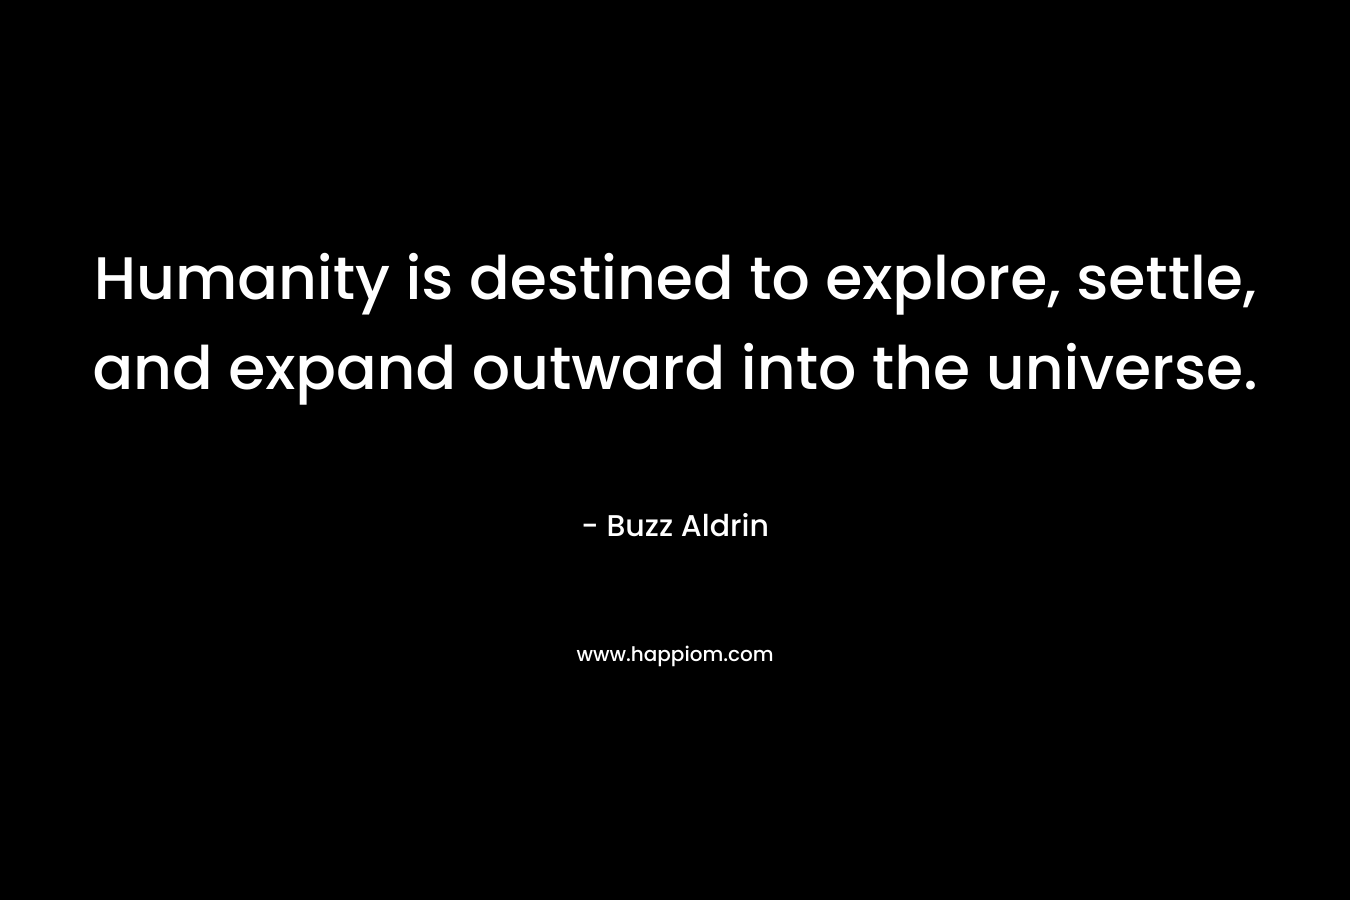 Humanity is destined to explore, settle, and expand outward into the universe.